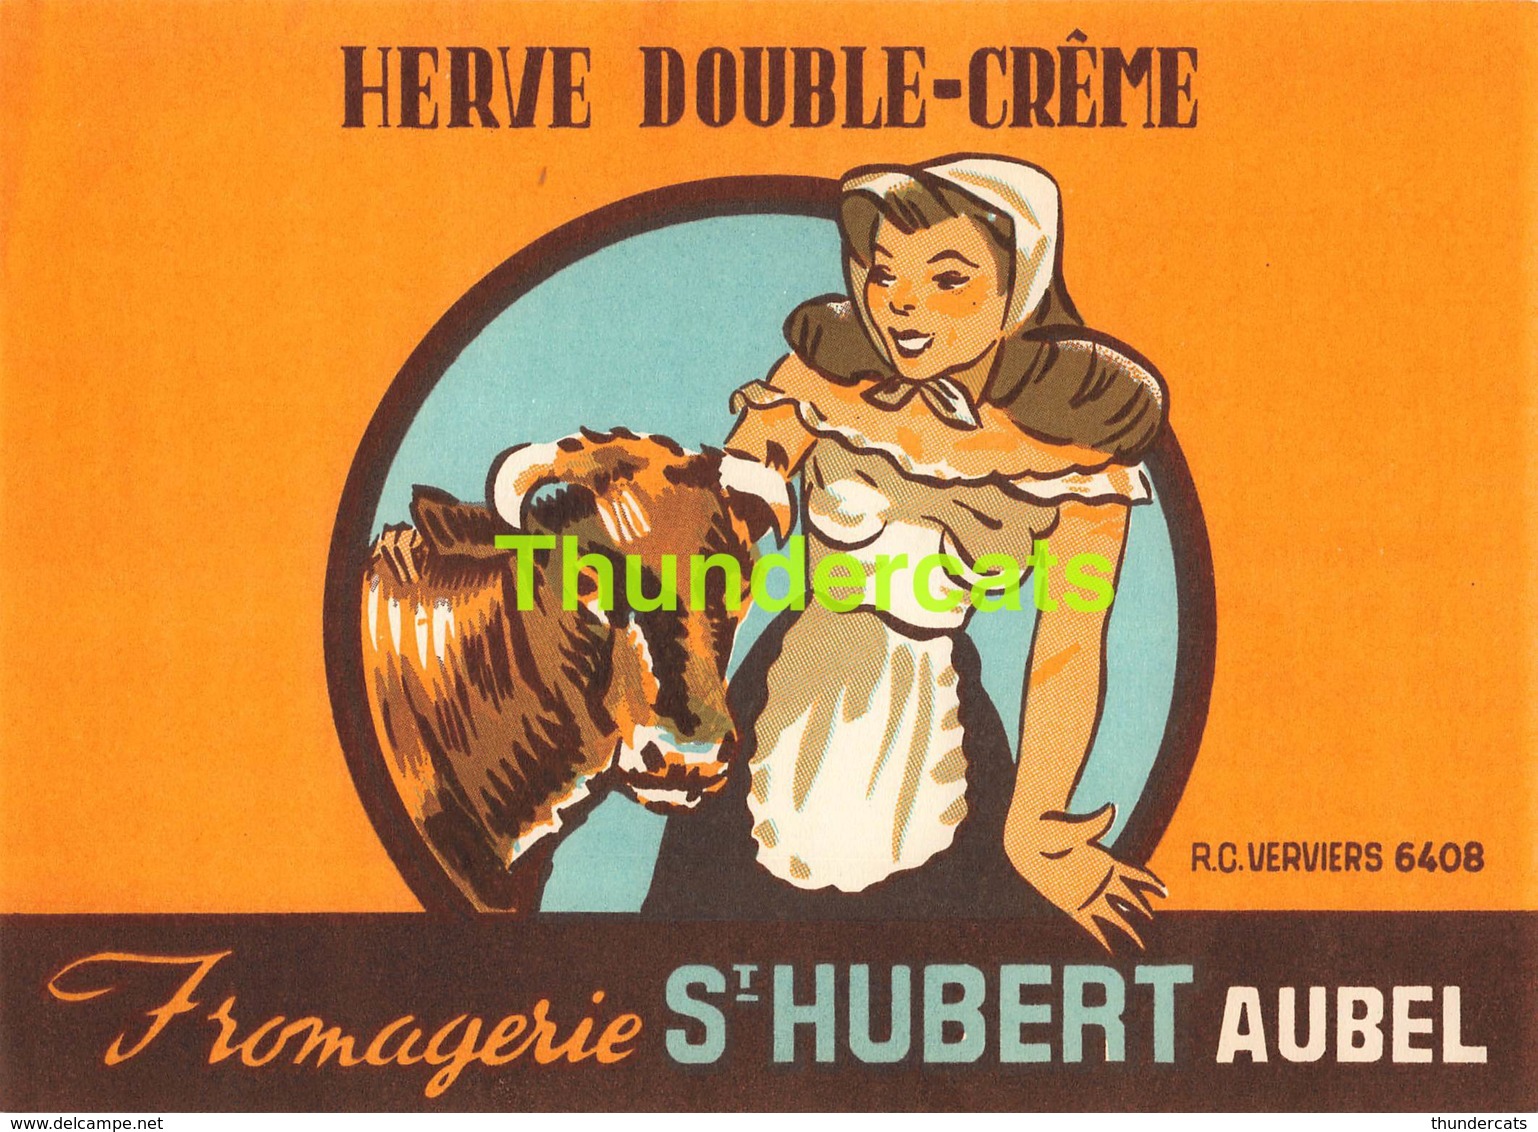 ANCIENNE ETIQUETTE FROMAGE ETIKET KAAS OLD CHEESE LABEL PUB HERVE DOUBLE CREME ST HUBERT AUBEL - Cheese